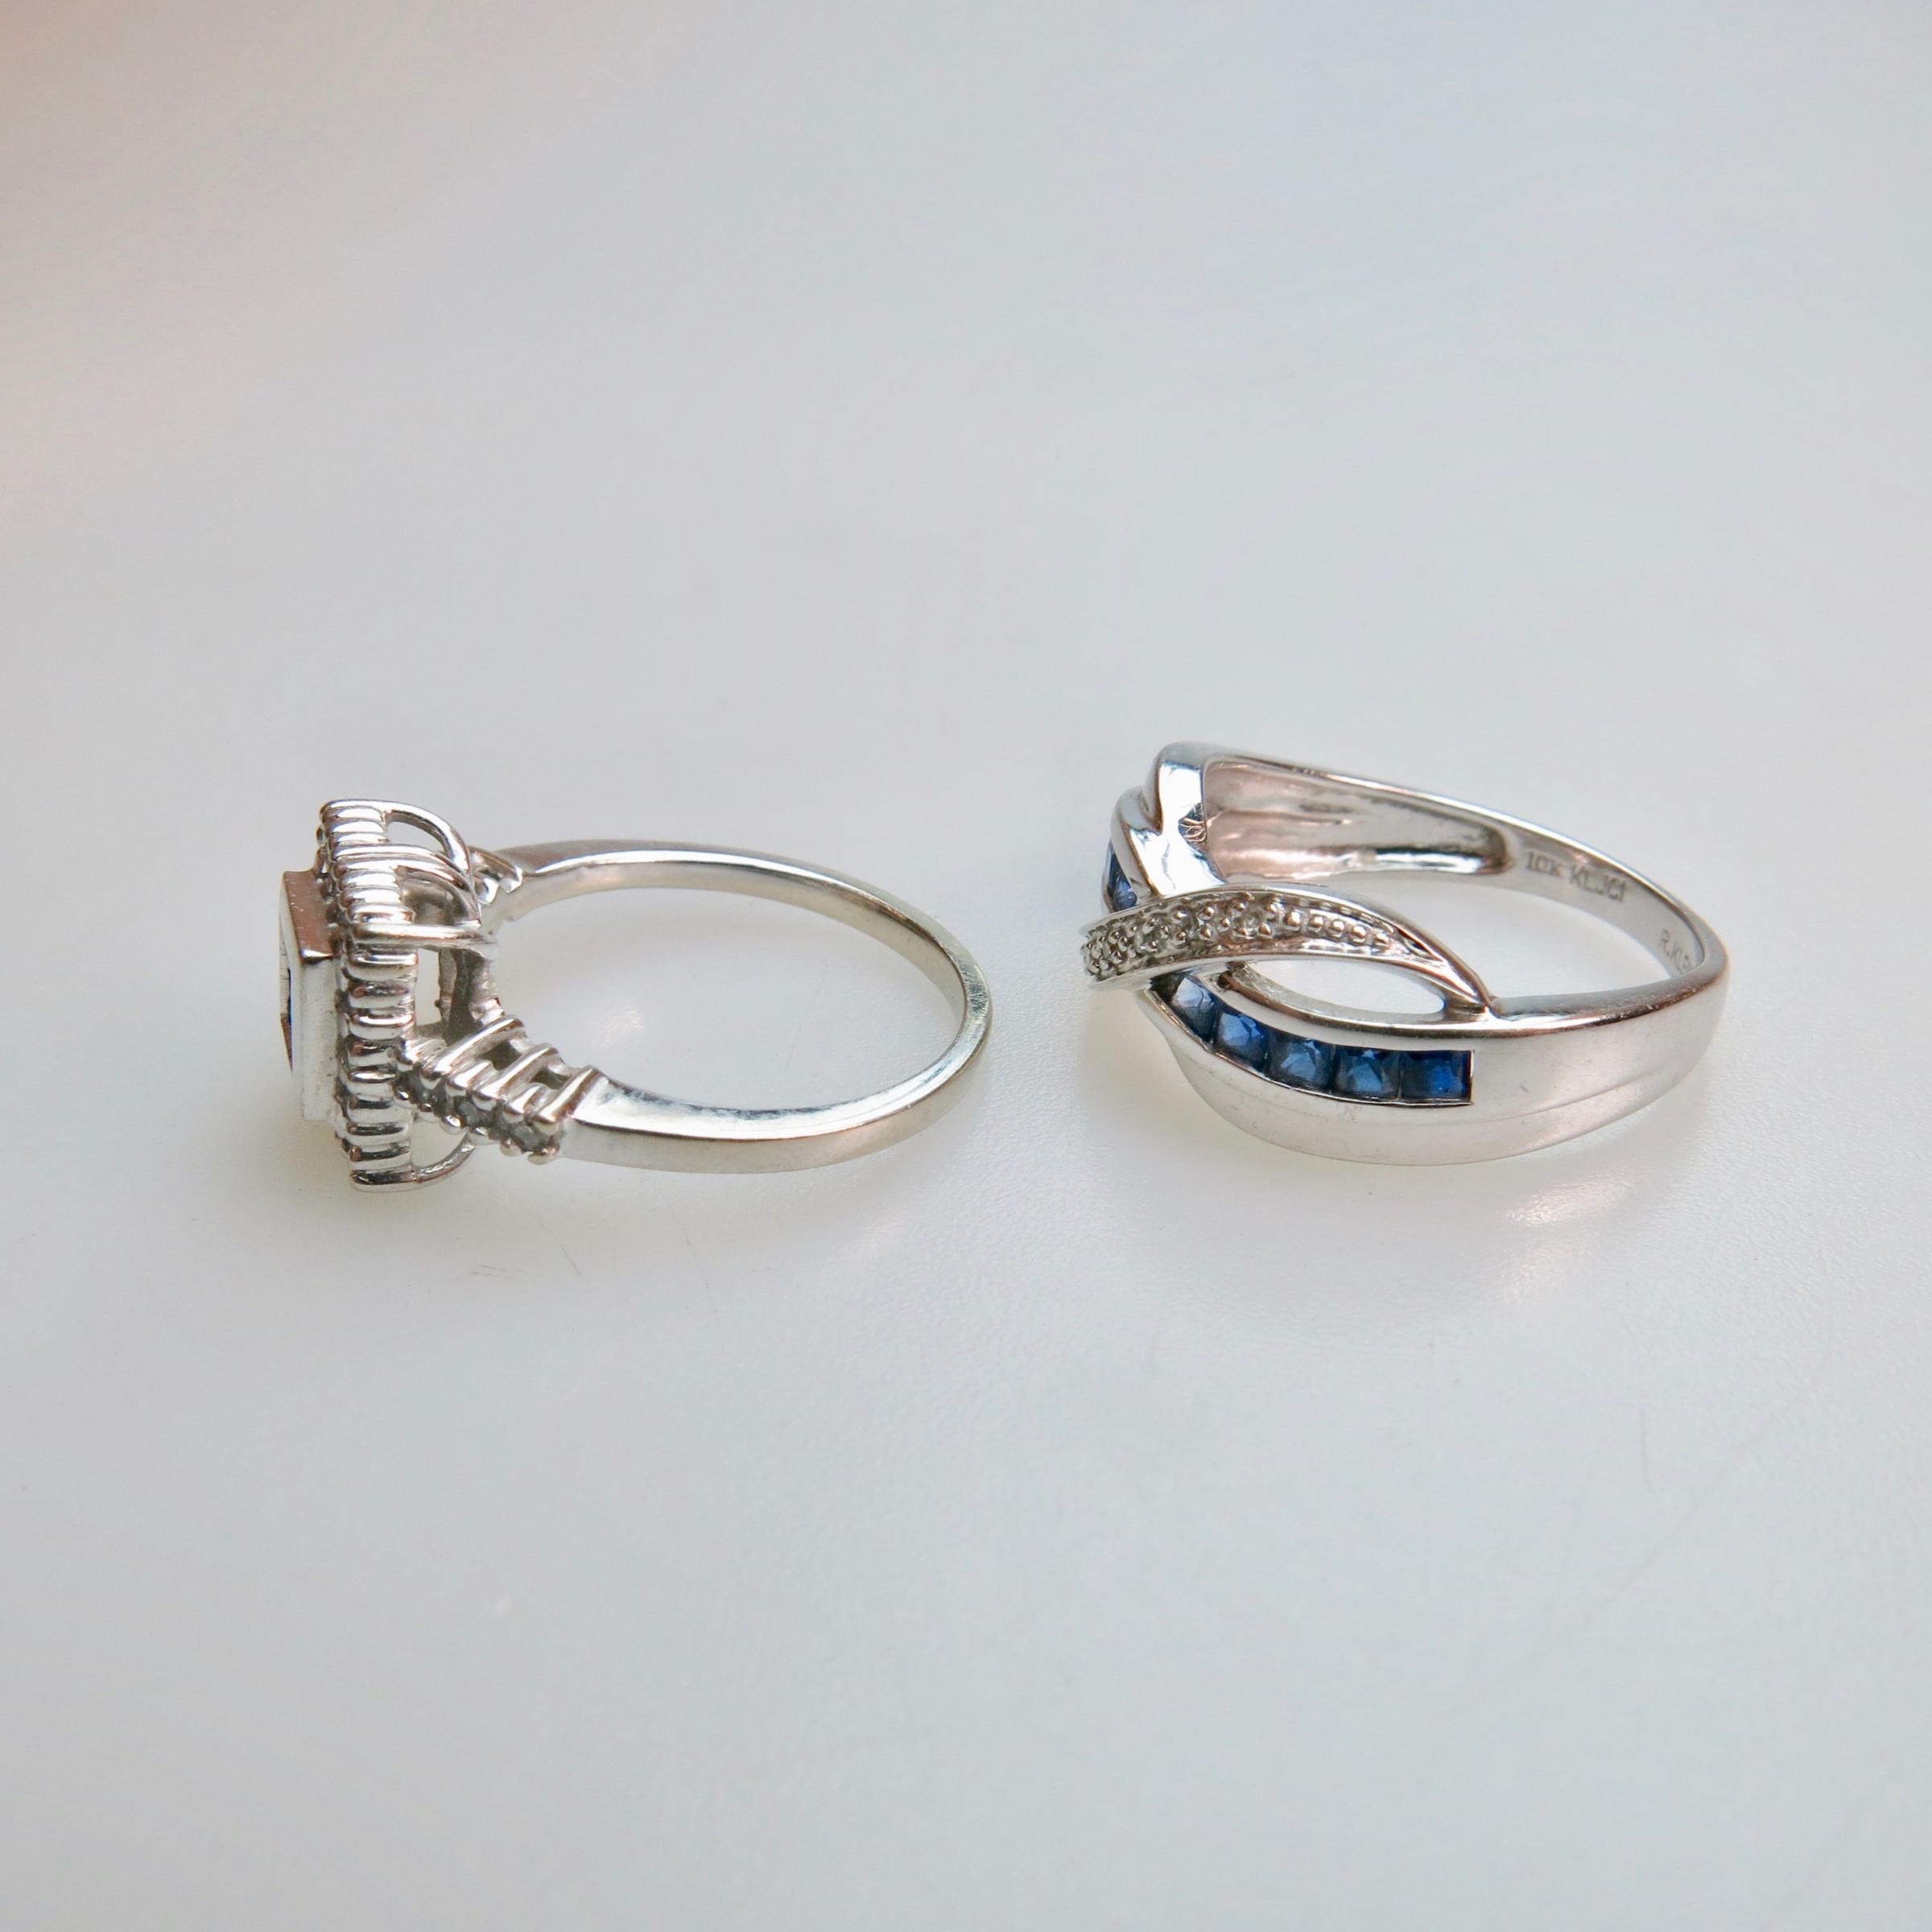 A 14k White Gold Ring And A 10k White Gold Ring